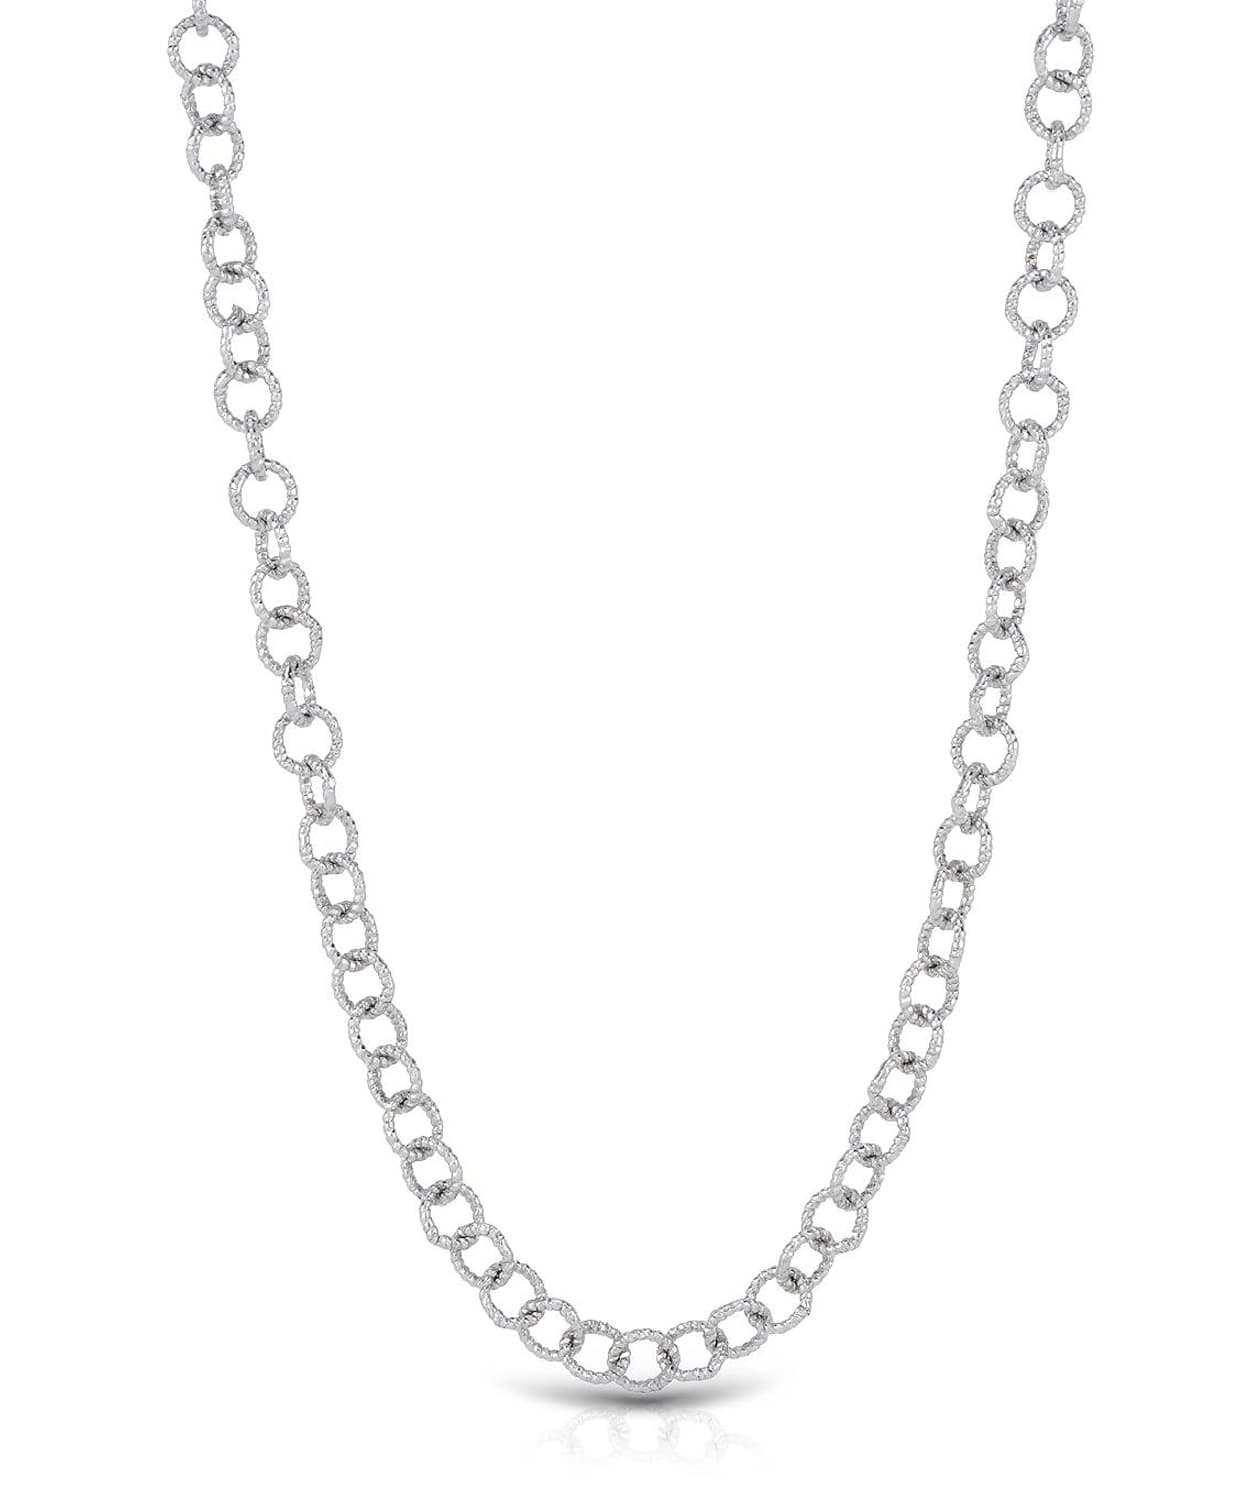 2.7mm 14k White Gold Textured Link Chain View 1